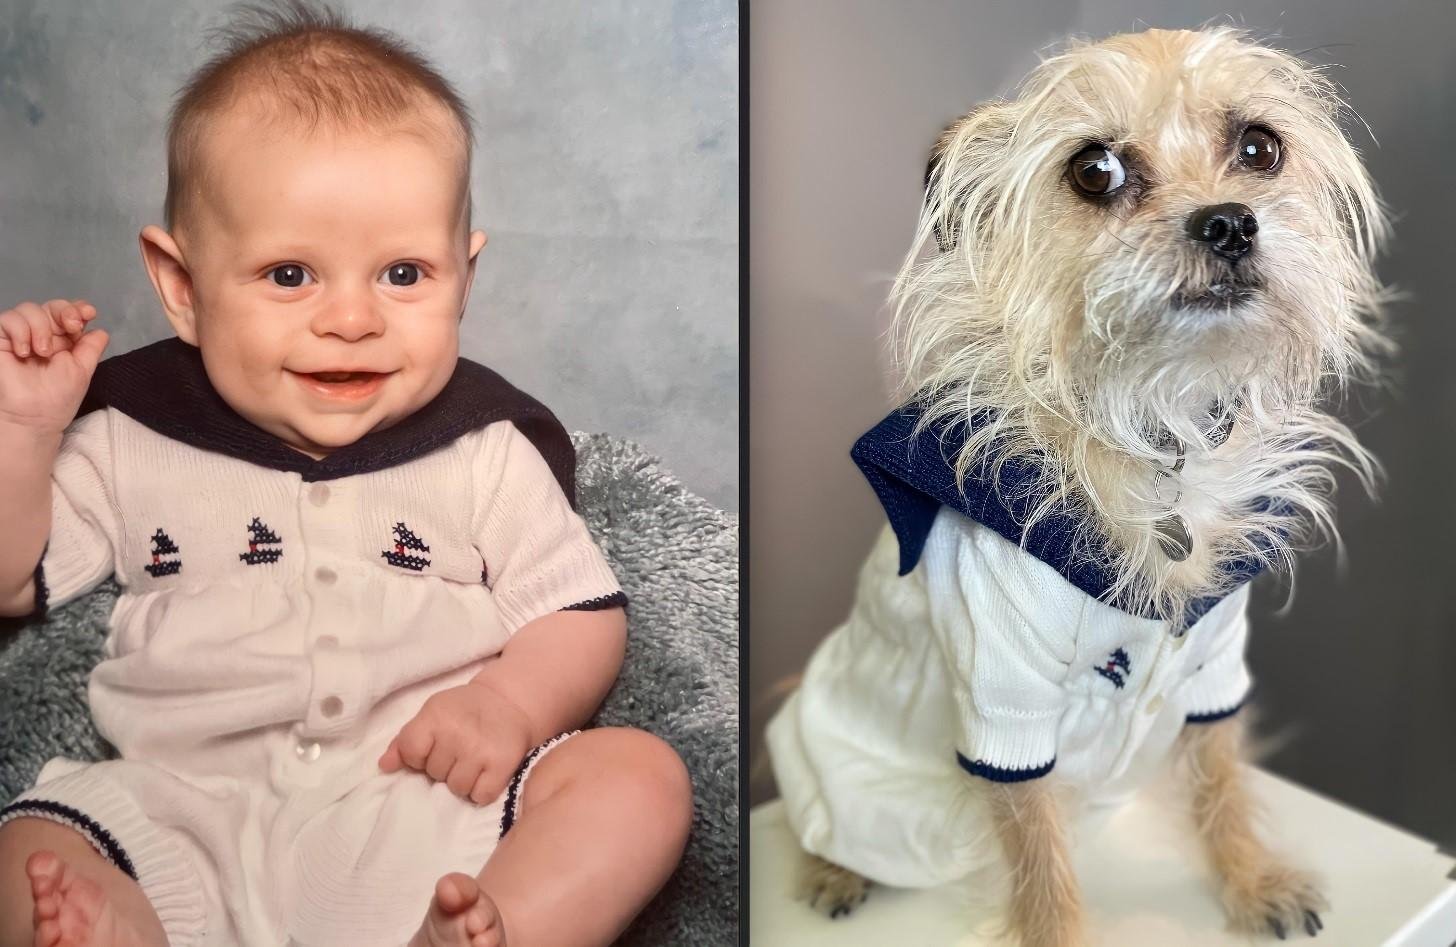 15 photos about love between children and pets